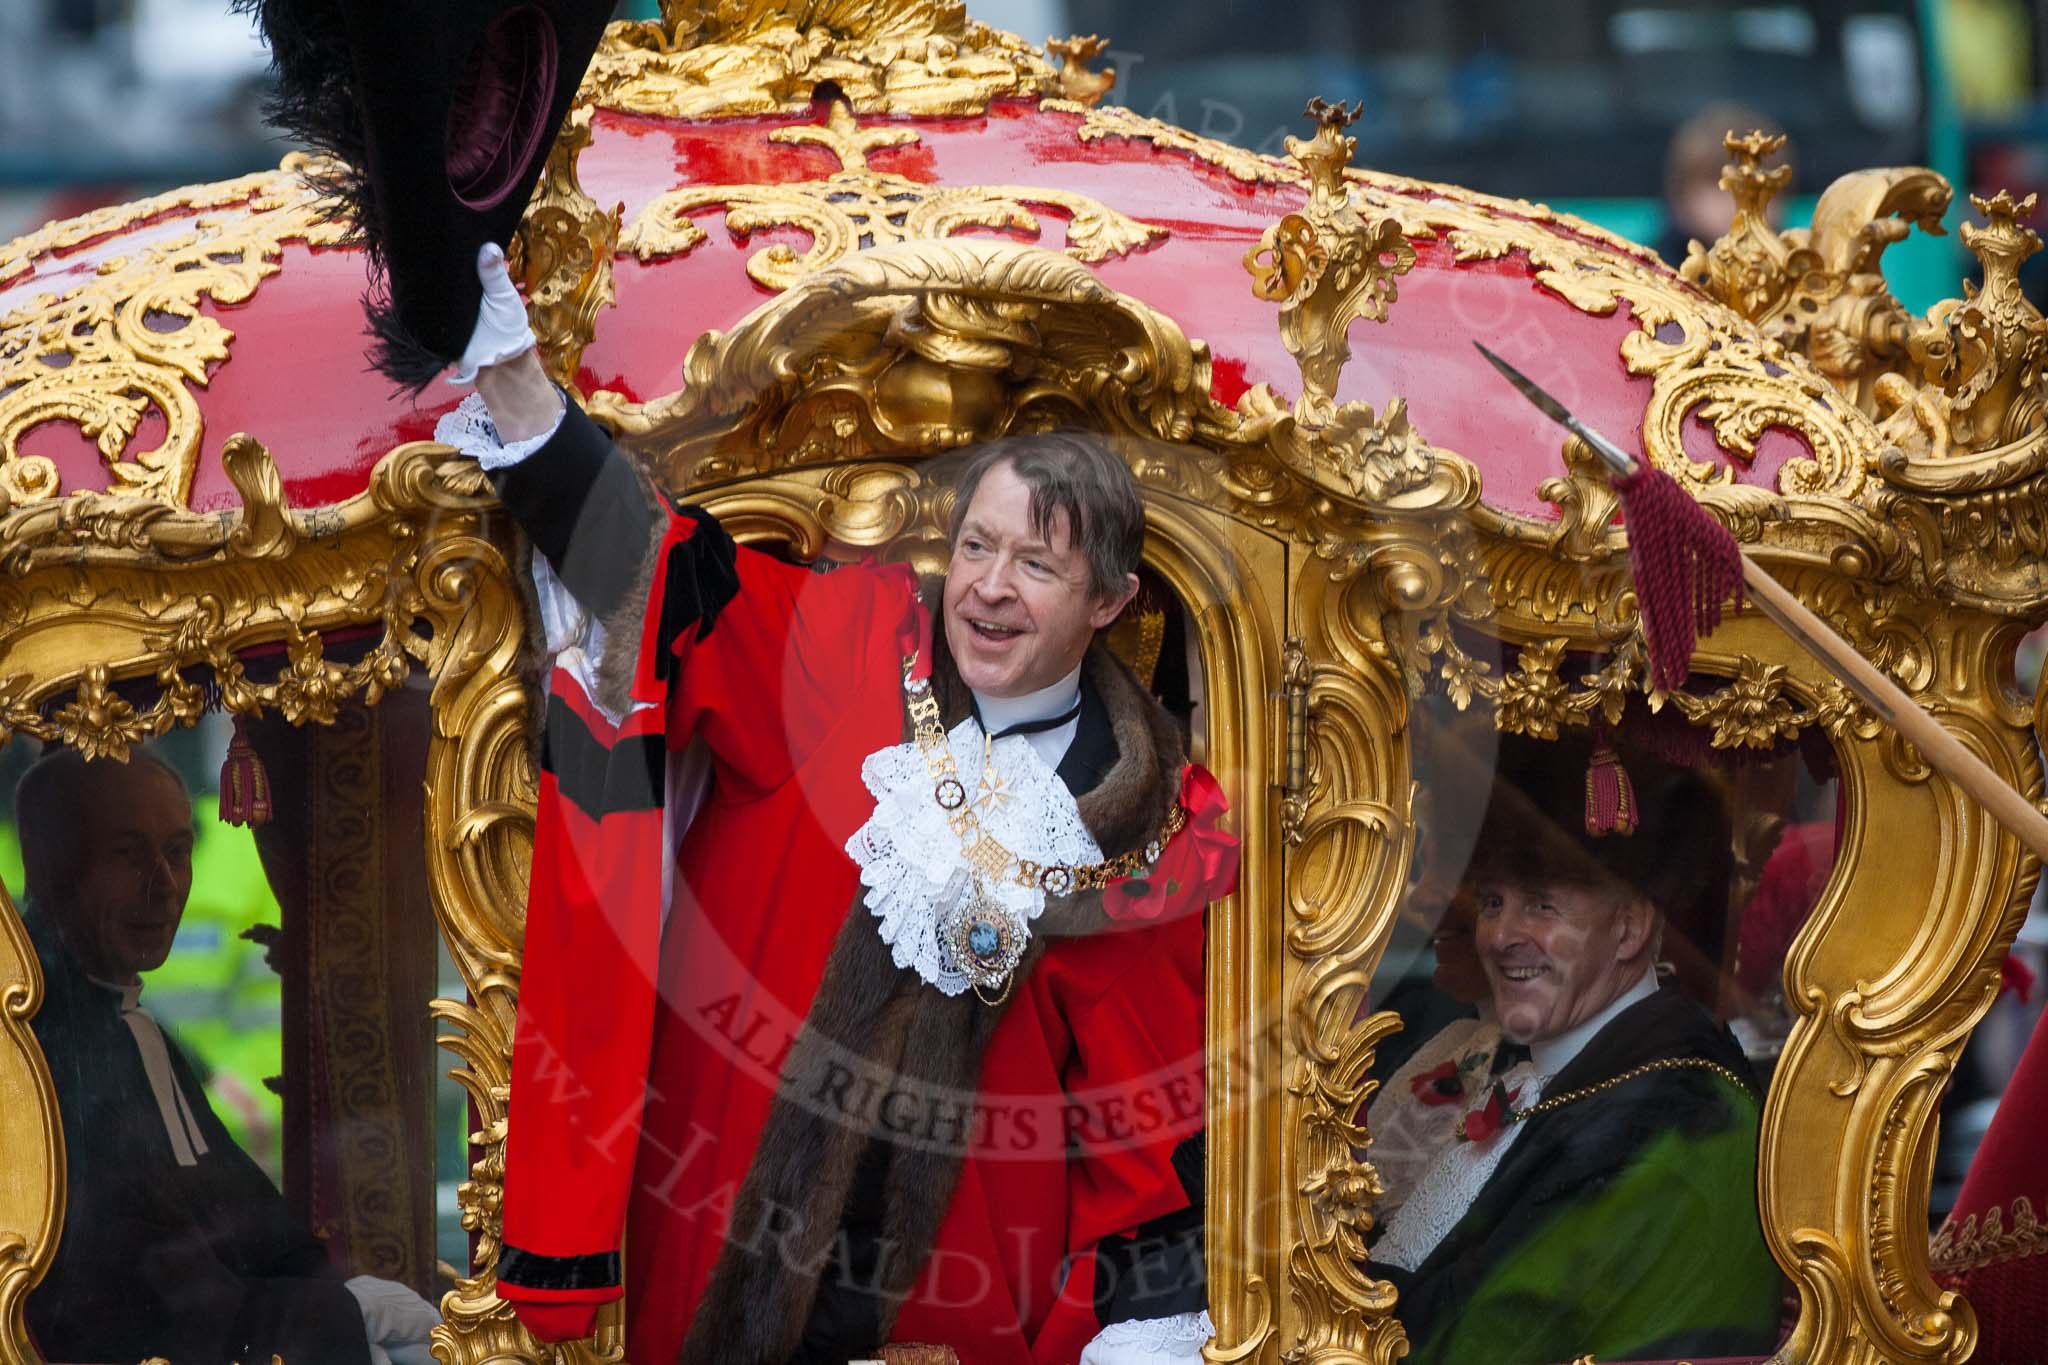 Lord Mayor's Show 2012: Lord Mayor Roger Gifford waving from his carriage as he is about to leave for St Paul's Cathedral..
Press stand opposite Mansion House, City of London,
London,
Greater London,
United Kingdom,
on 10 November 2012 at 12:12, image #1951